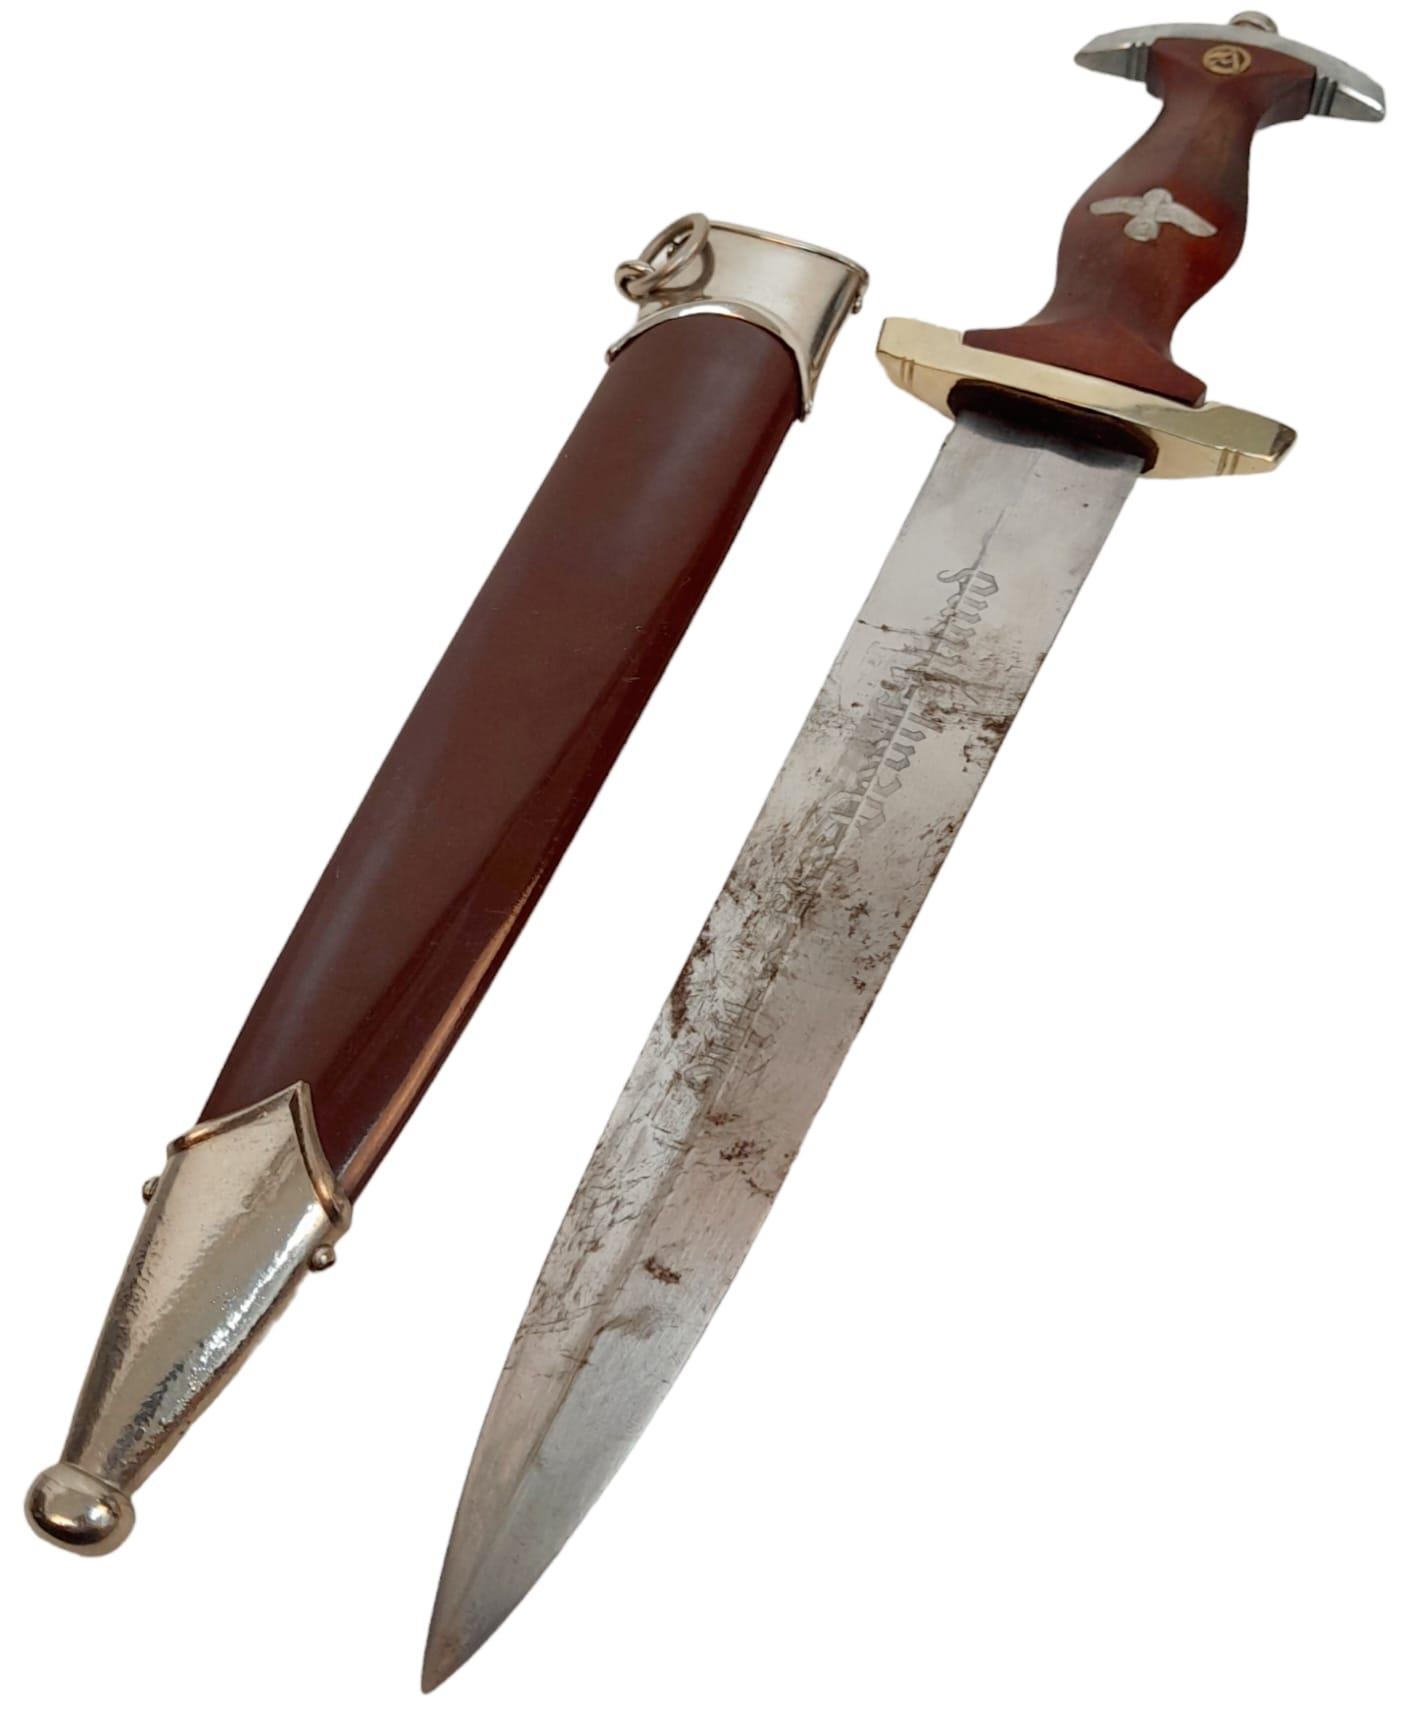 3rd Reich SA Dagger. Rzm Marked Blade M/85 for Athur Evertz, Solingen